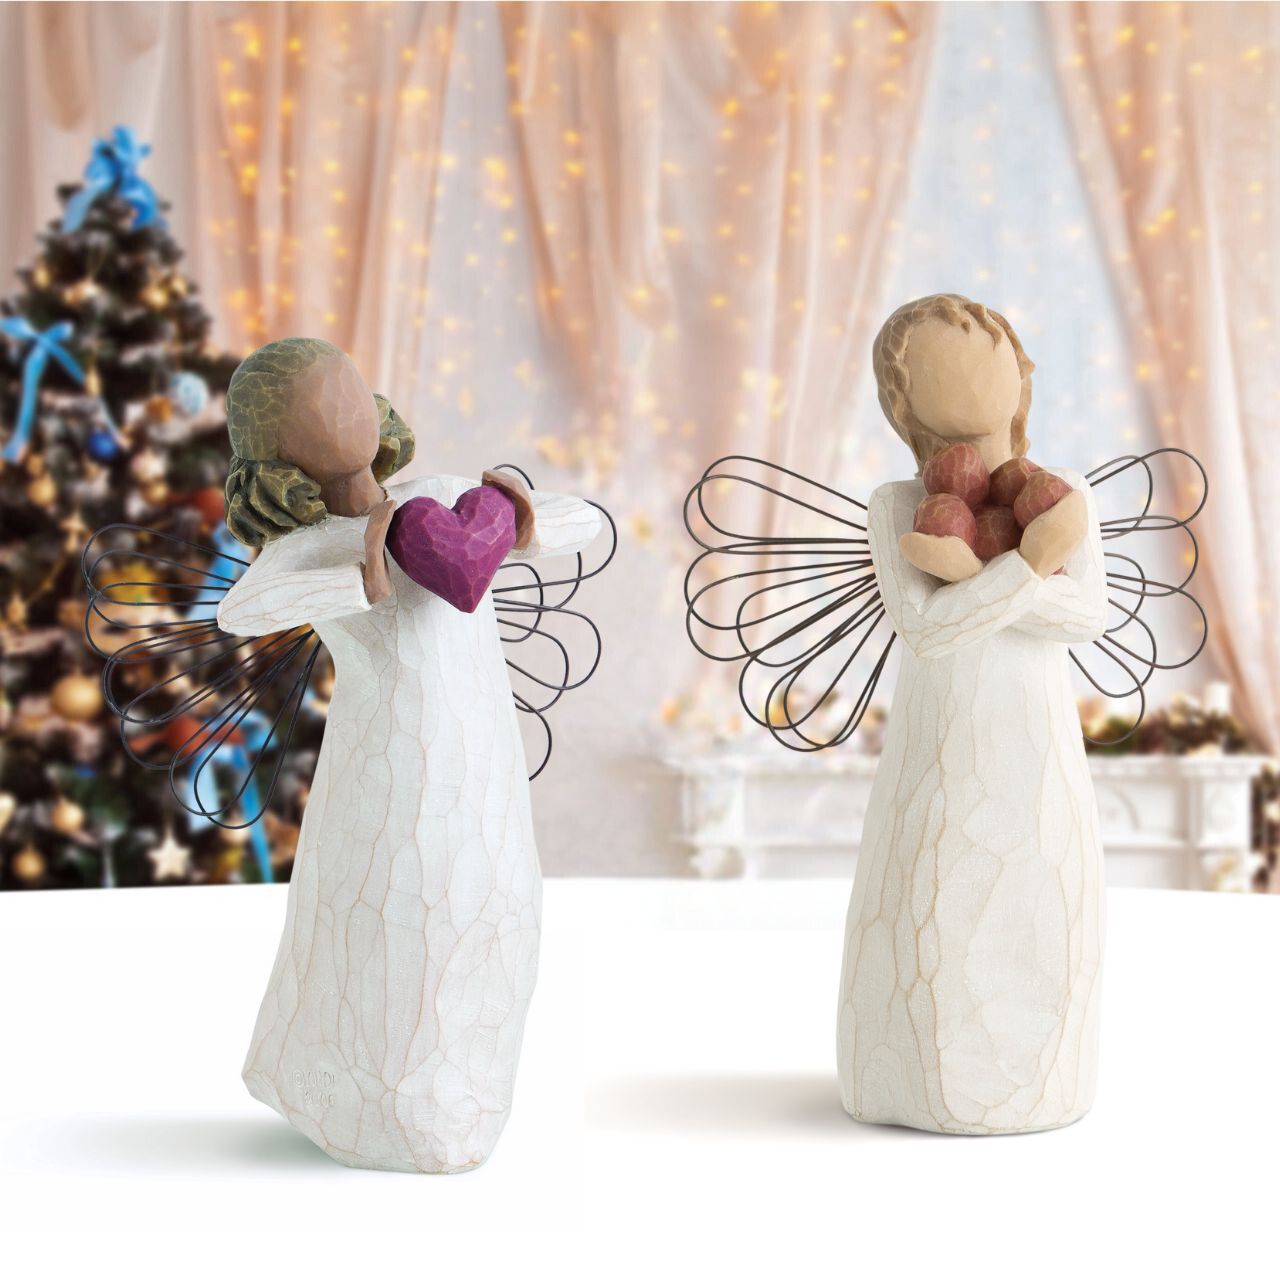 Good Health by Willow Tree  A gift to support and encourage hope and healing. A hospitality or housewarming gift for hostess. A gift for teachers. Willow Tree angels resonate with many cultures and ages of people.